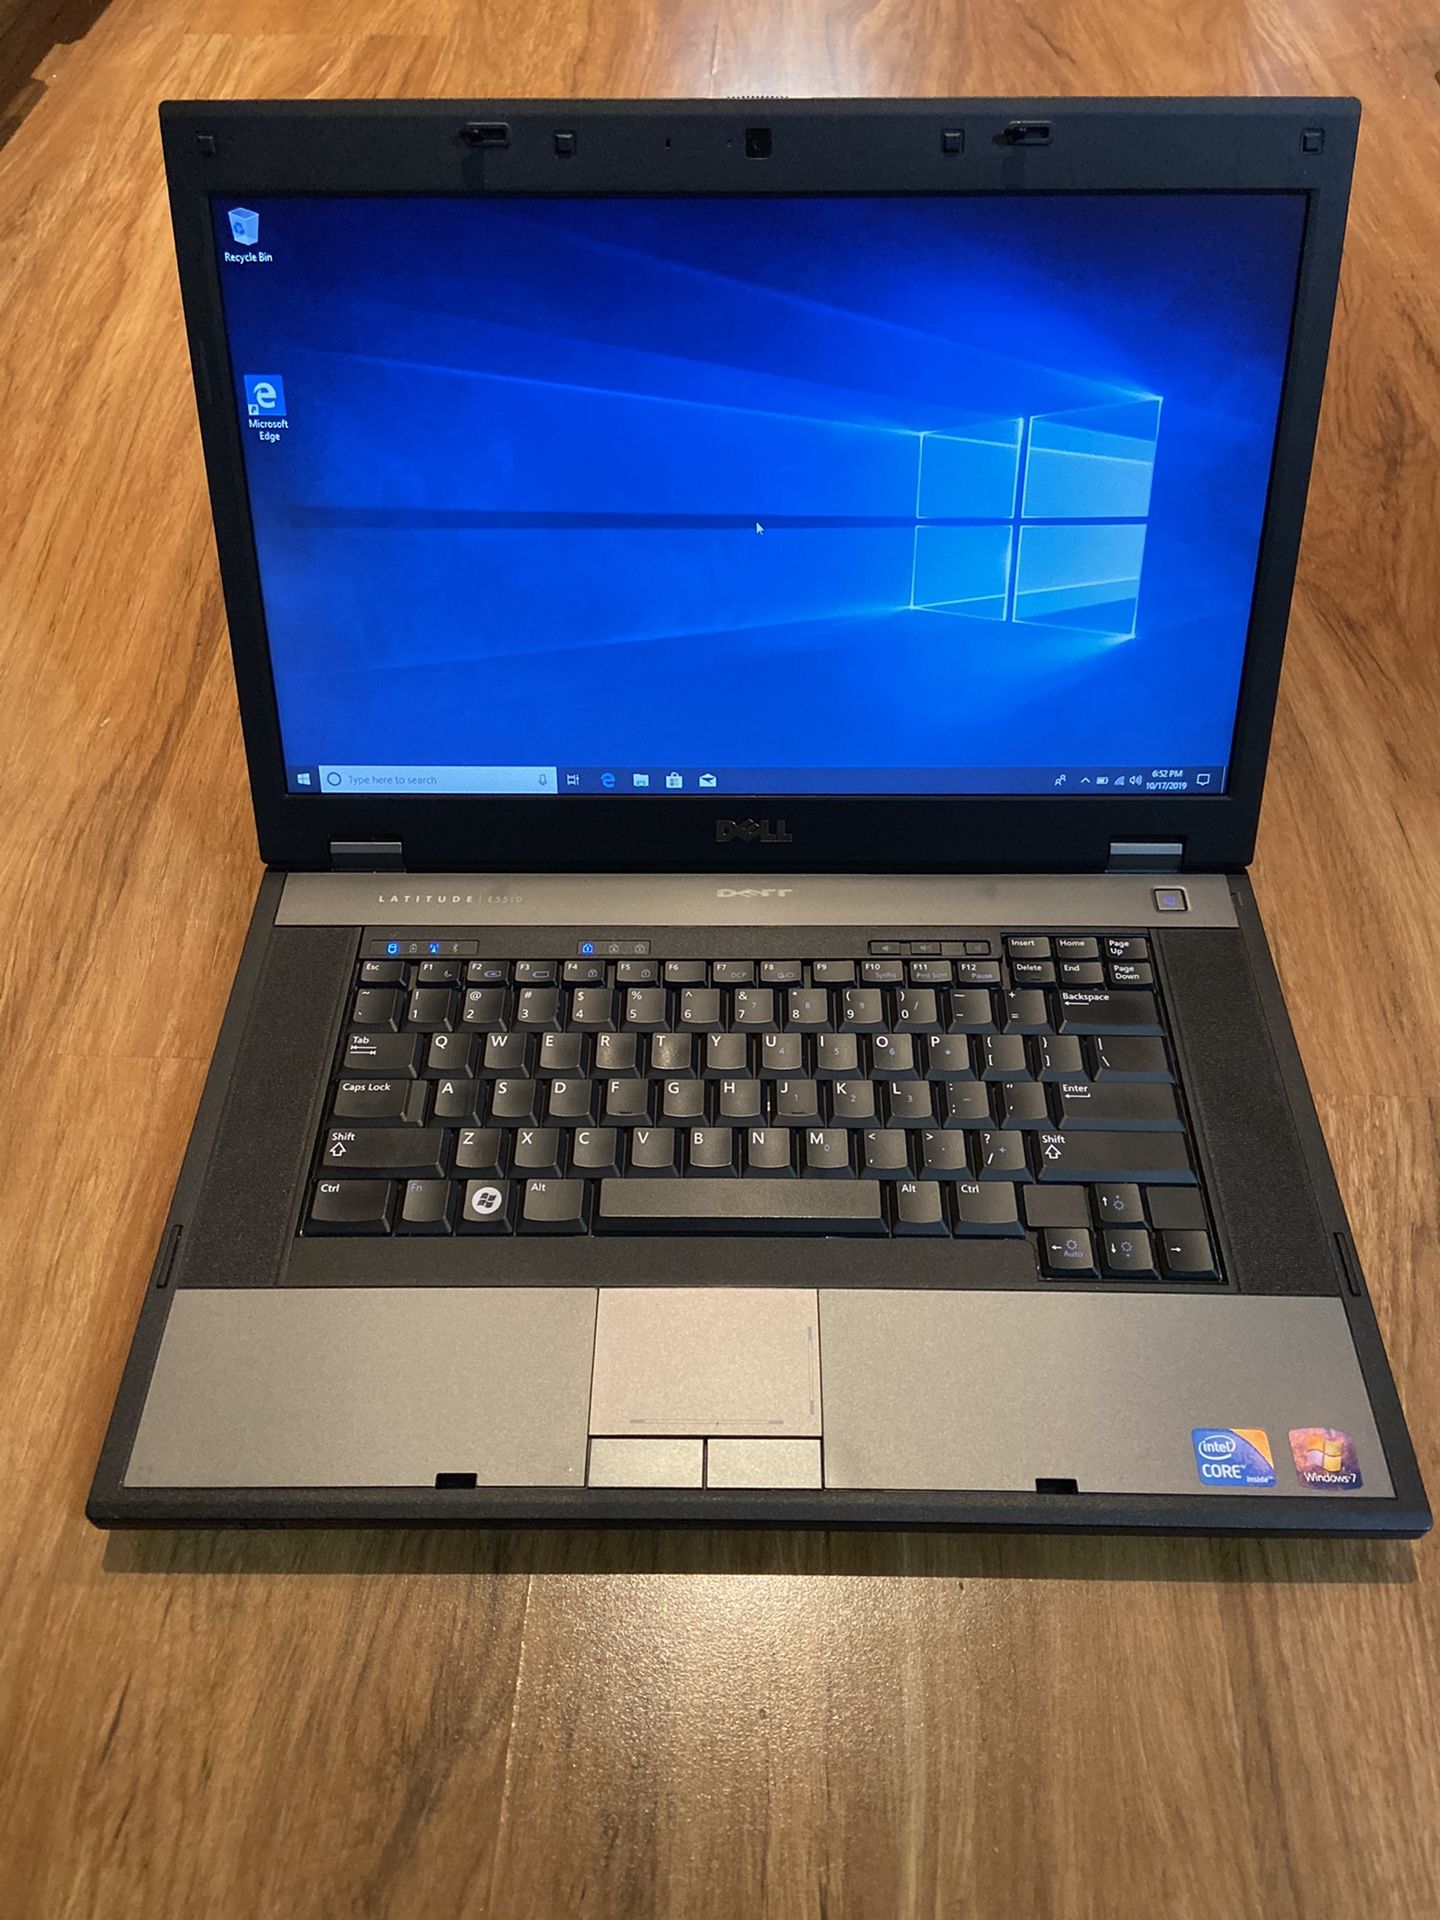 Dell Latitude E5510 core i5 4GB Ram 160GB Hard Drive Windows 10 Pro Laptop with charger in Excellent Working condition!!!!!!!!